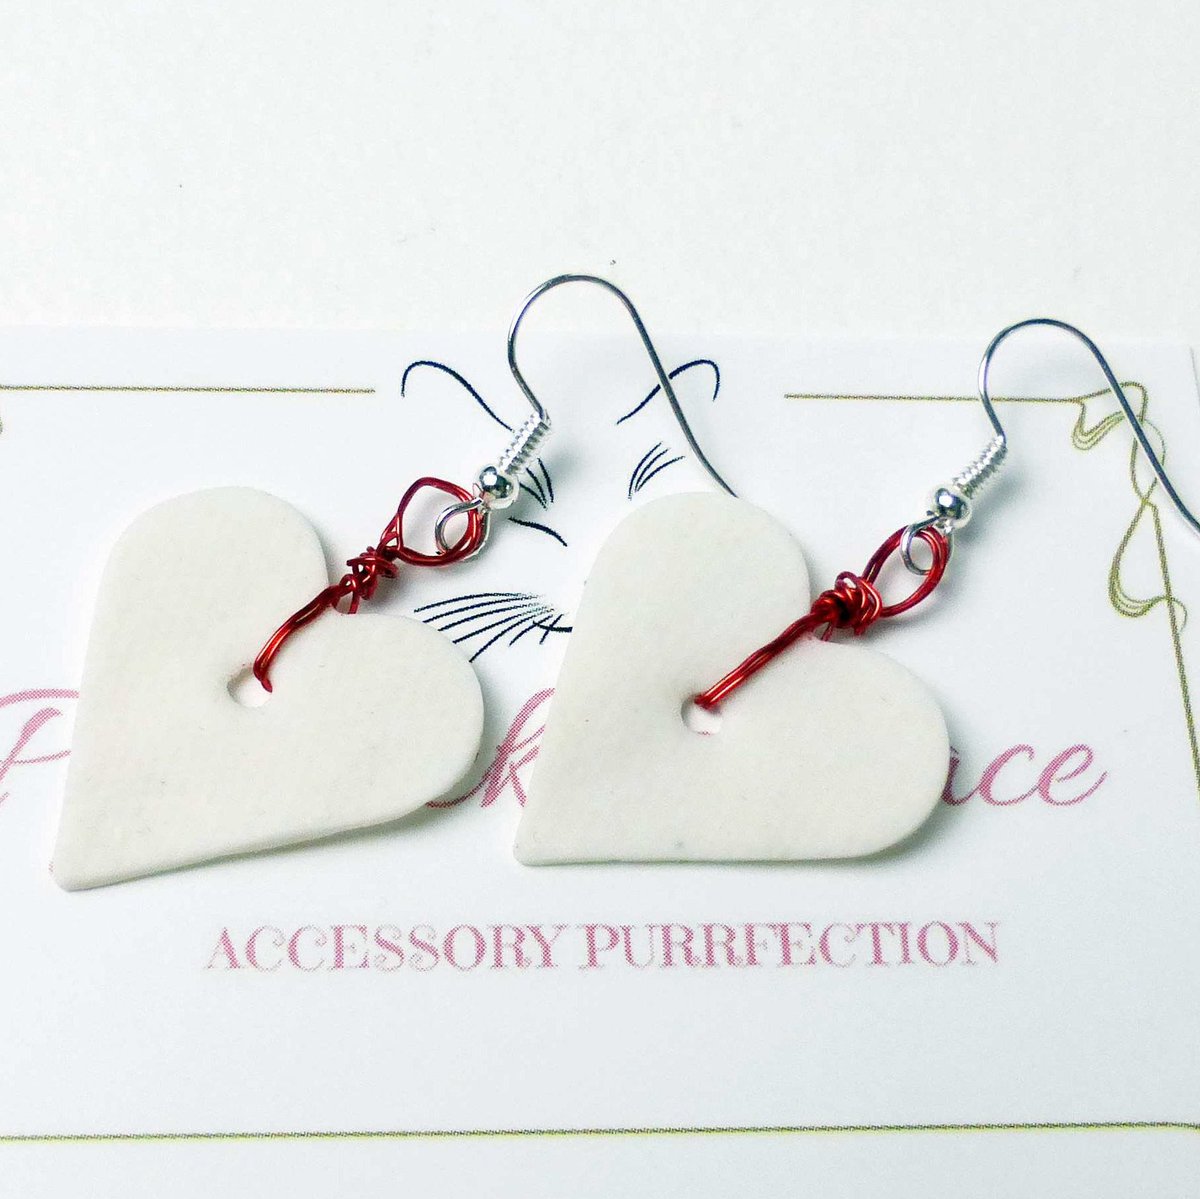 Excited to share the latest addition to #pyewacketsplace #WhiteHeartEarrings  #LoveHeartEarrings #WhiteEarrings #HeartDroppers #GiftForHer #CeramicHearts #ValentineGift etsy.me/2LXndij #jewellery #earrings #white #red #heart #ceramic #earwire